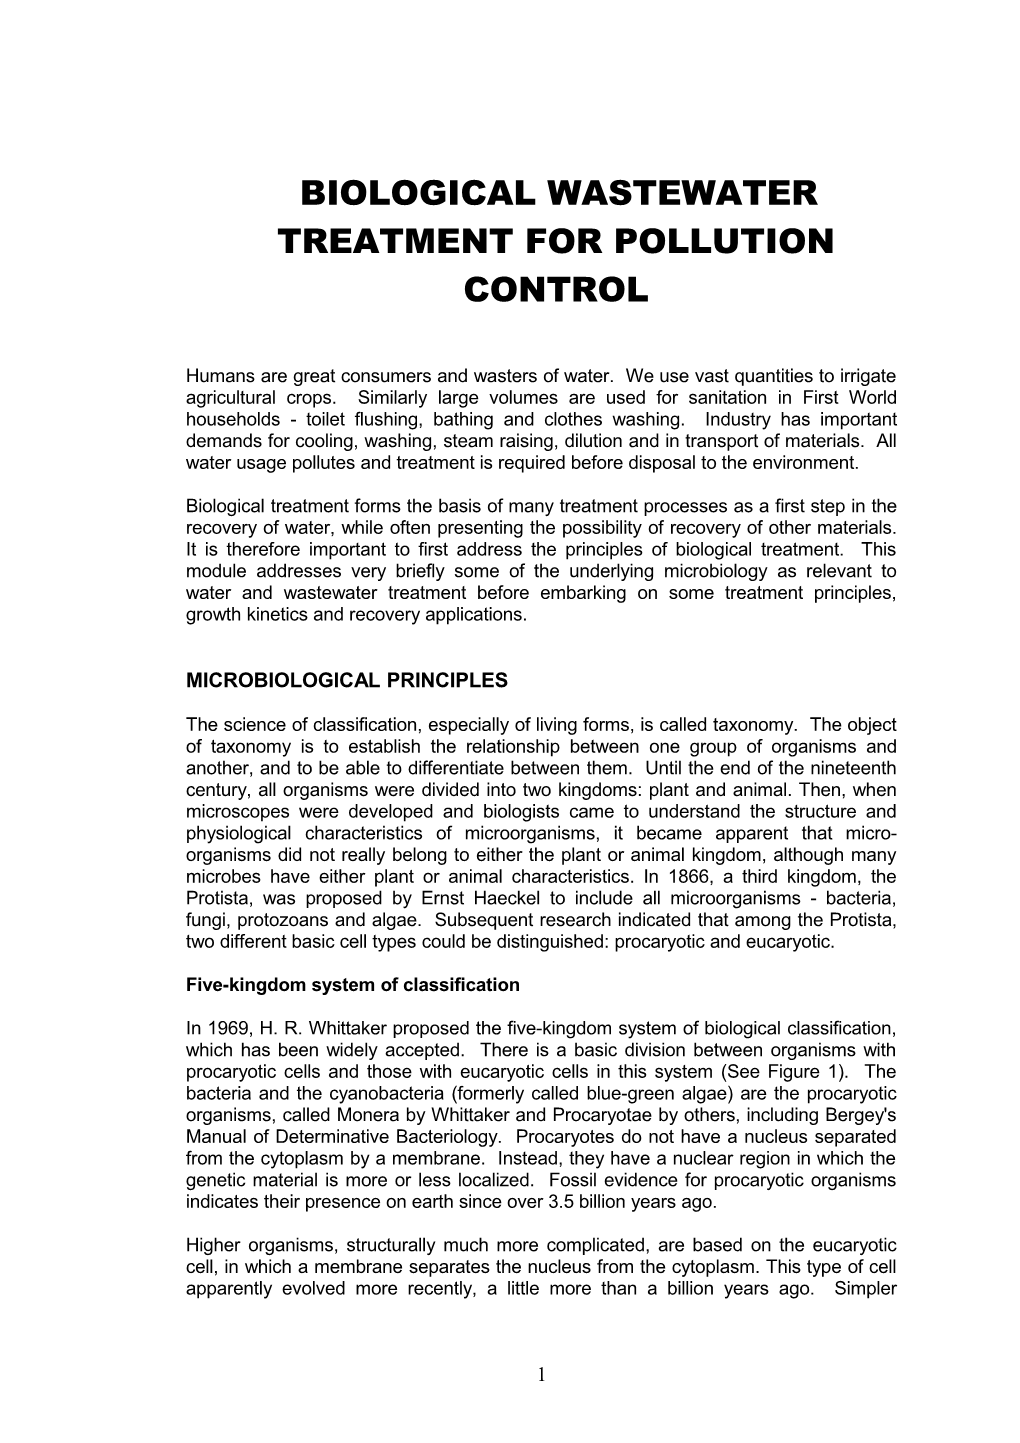 Biological Wastewater Treatment for Pollution Control